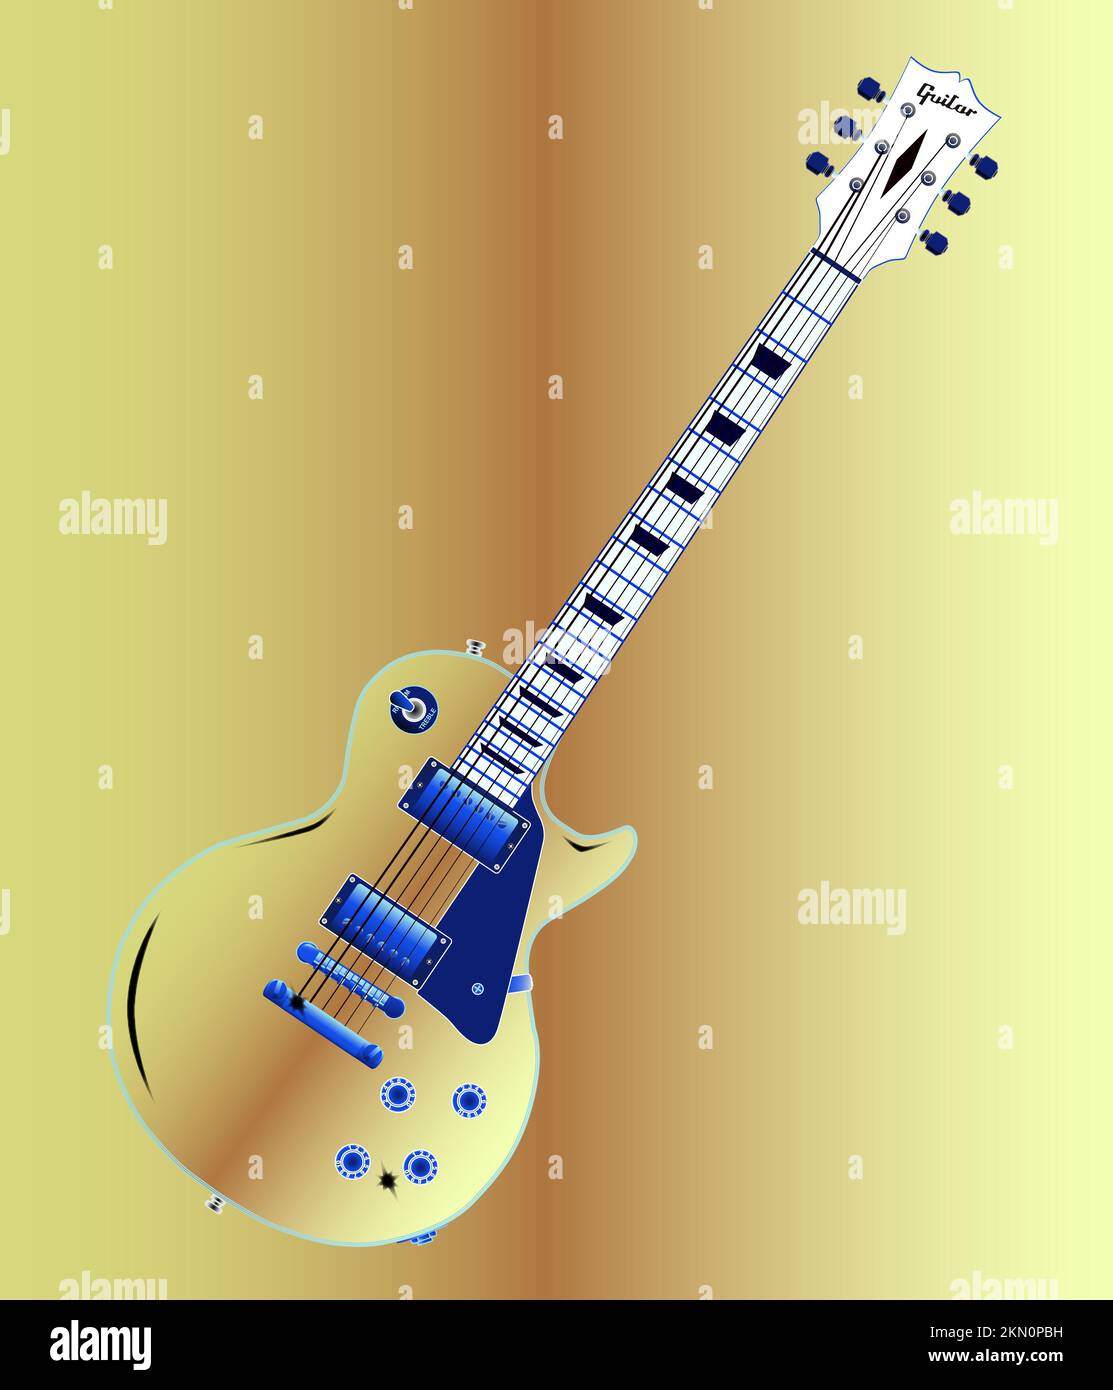 The definitive rock and roll guitar in yellow isolated over a yellow background. Stock Photo